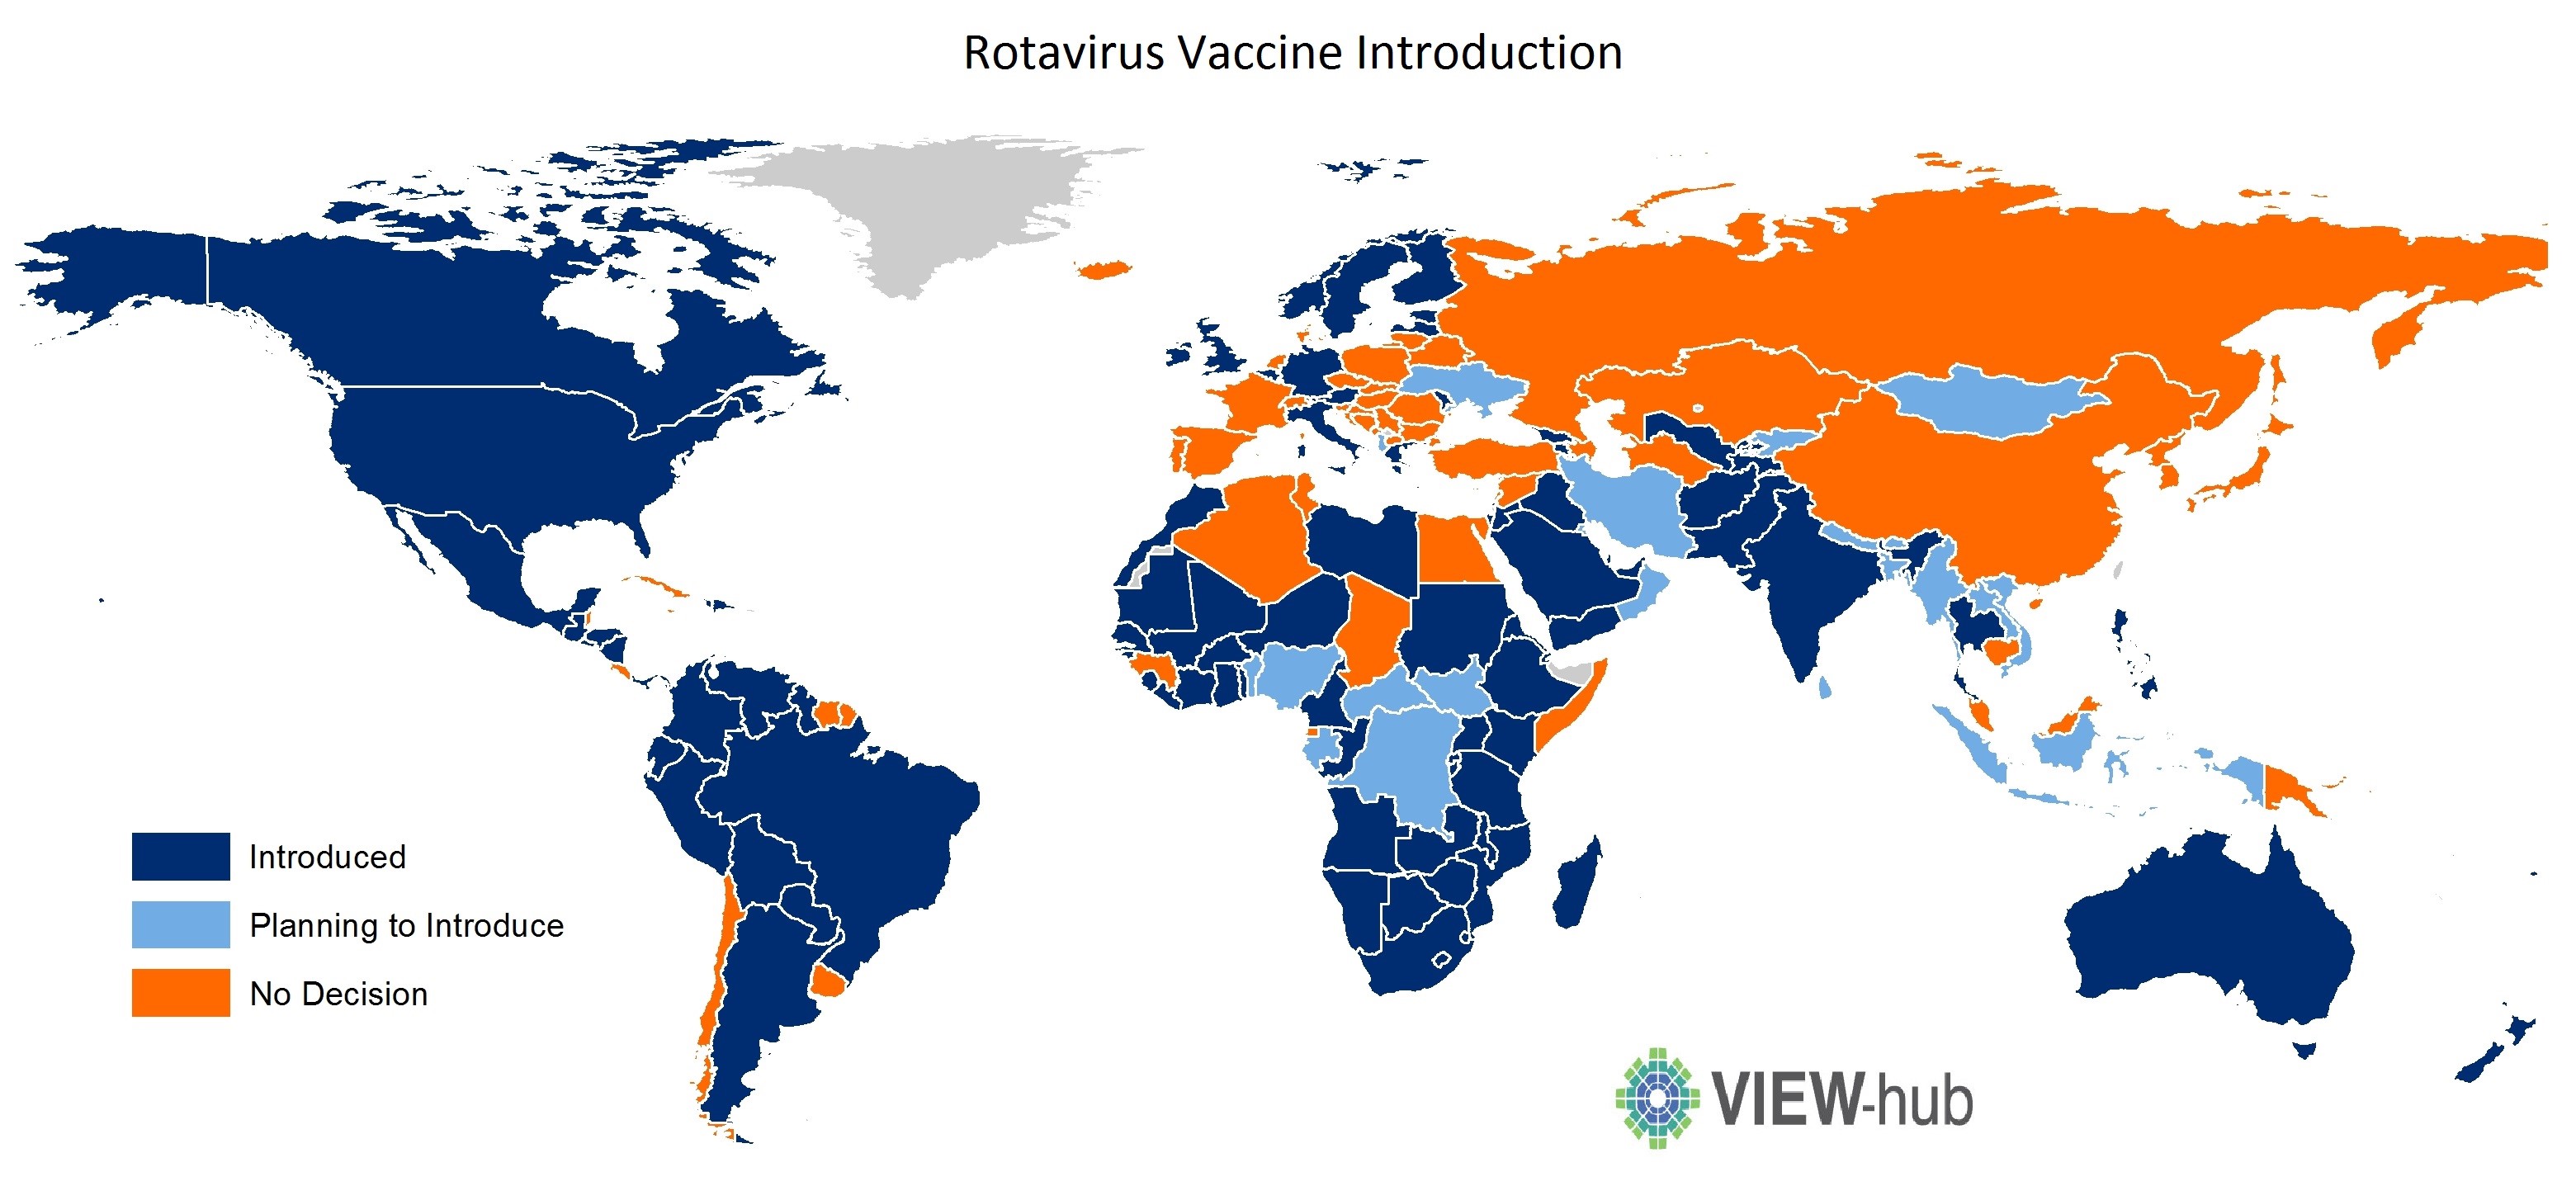 Map showing worldwide rotavirus vaccine introduction status by country, August 2018